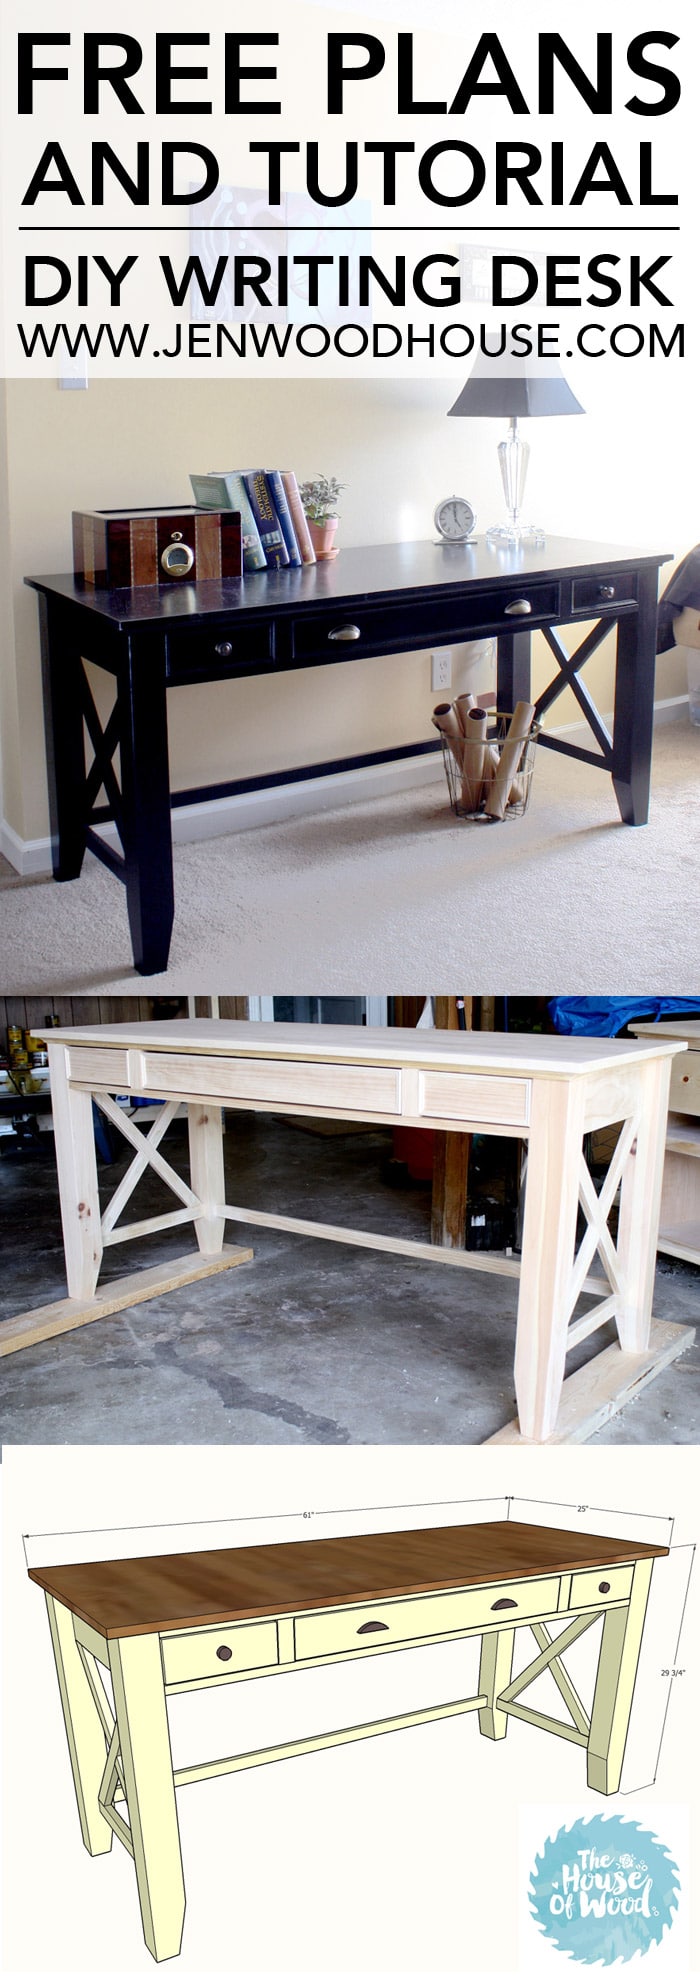 How to build a DIY writing desk. Free plans and step-by-step tutorial!